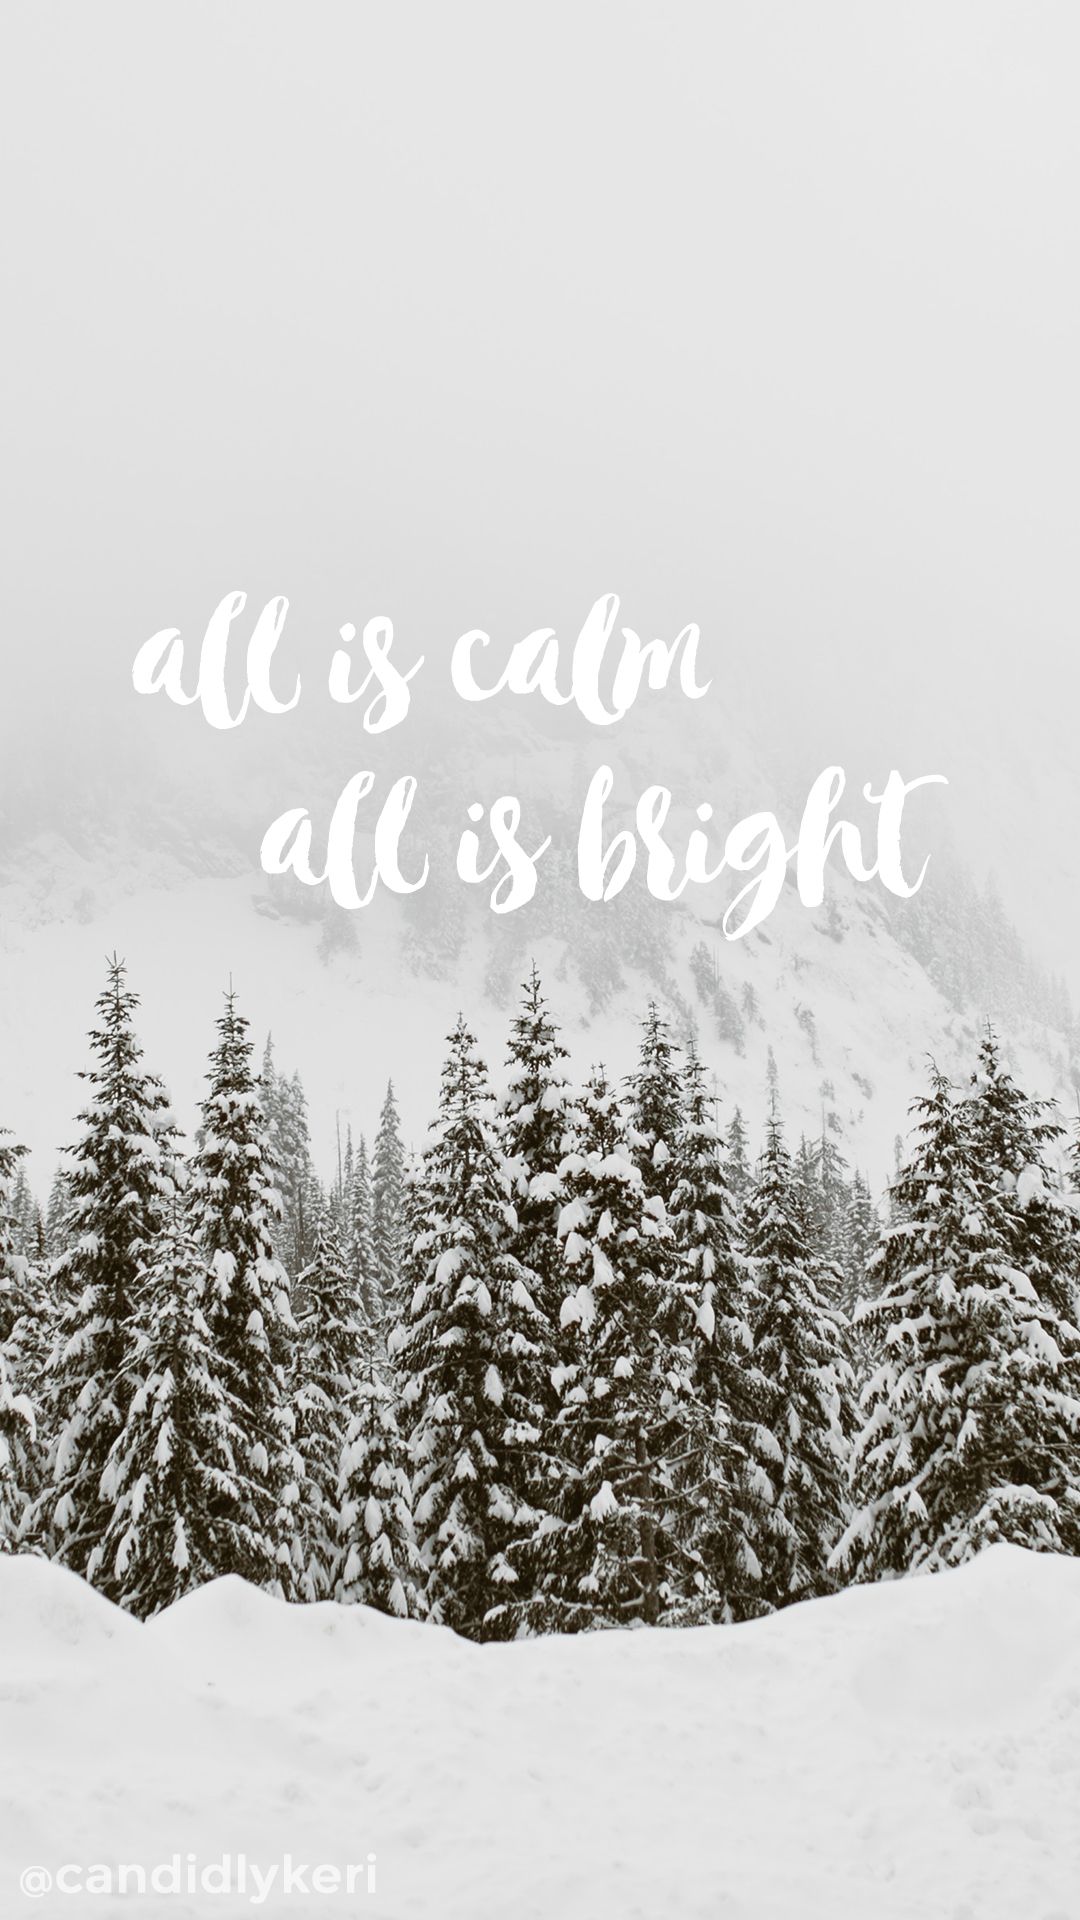 all is calm all is bright background wallpaper you can download for free on the blog! For an. Holiday wallpaper, Christmas phone wallpaper, Christmas background